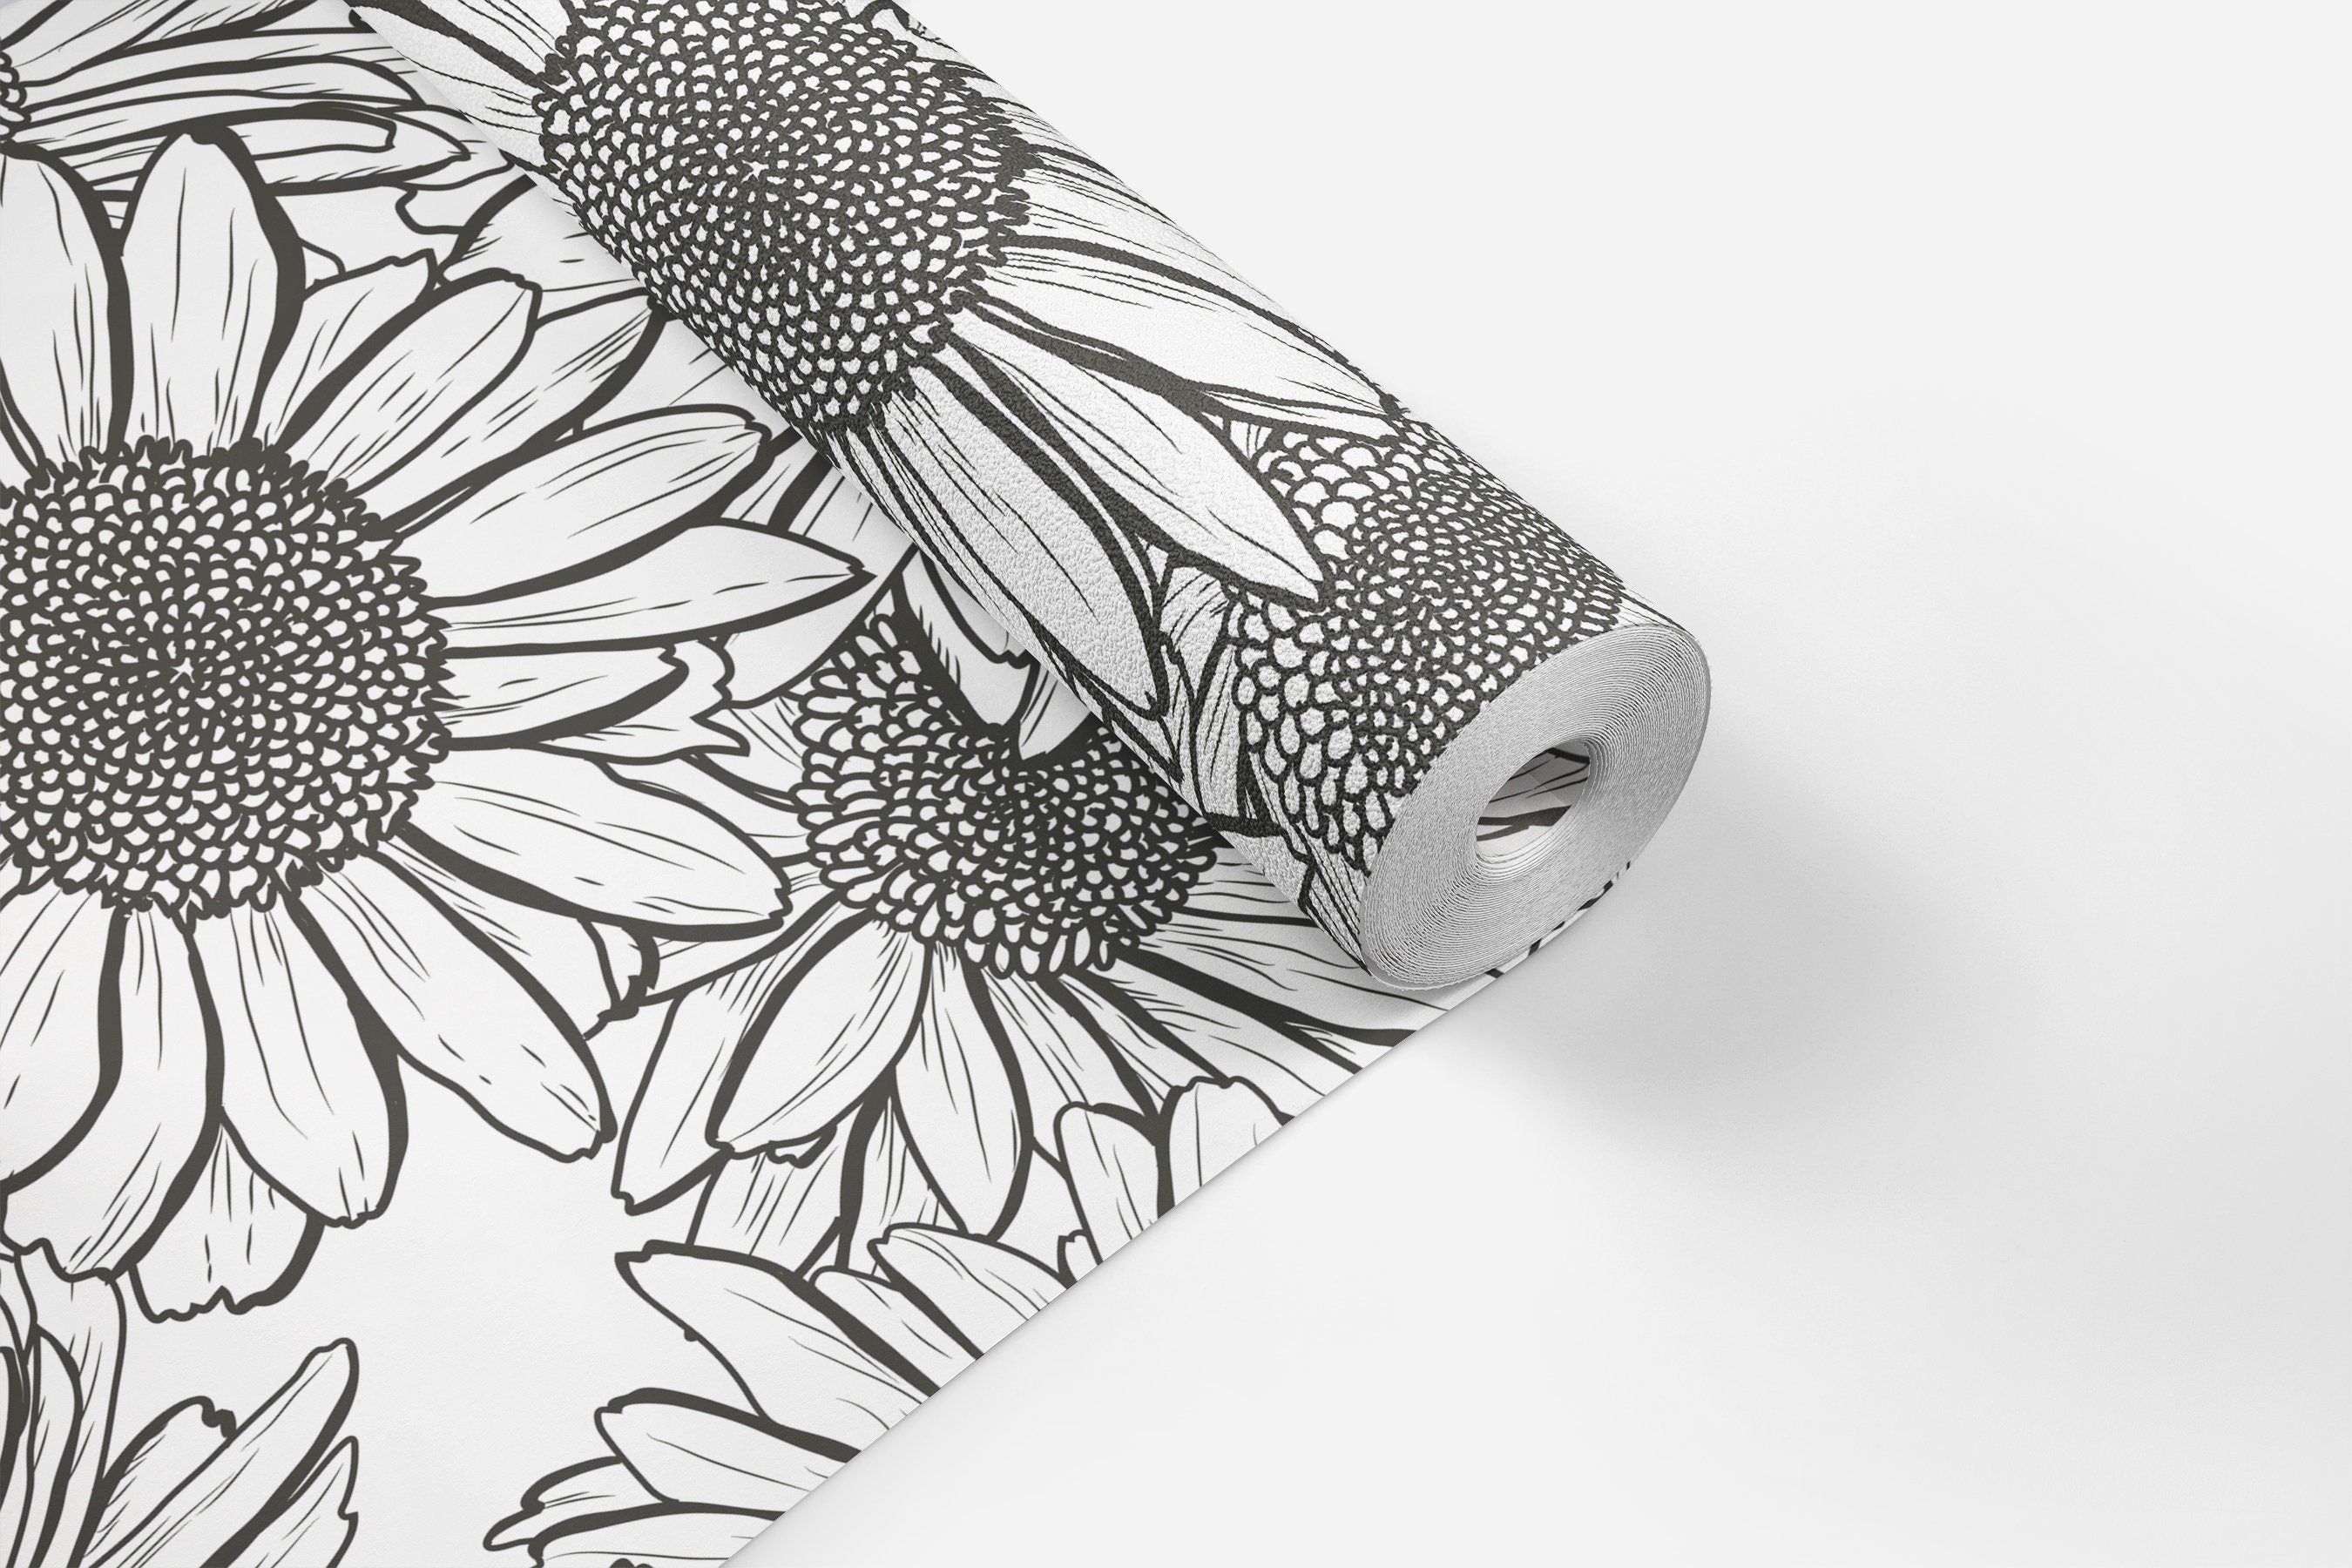 Black and white dandelion Wallpaper - Peel and Stick or Non-Pasted